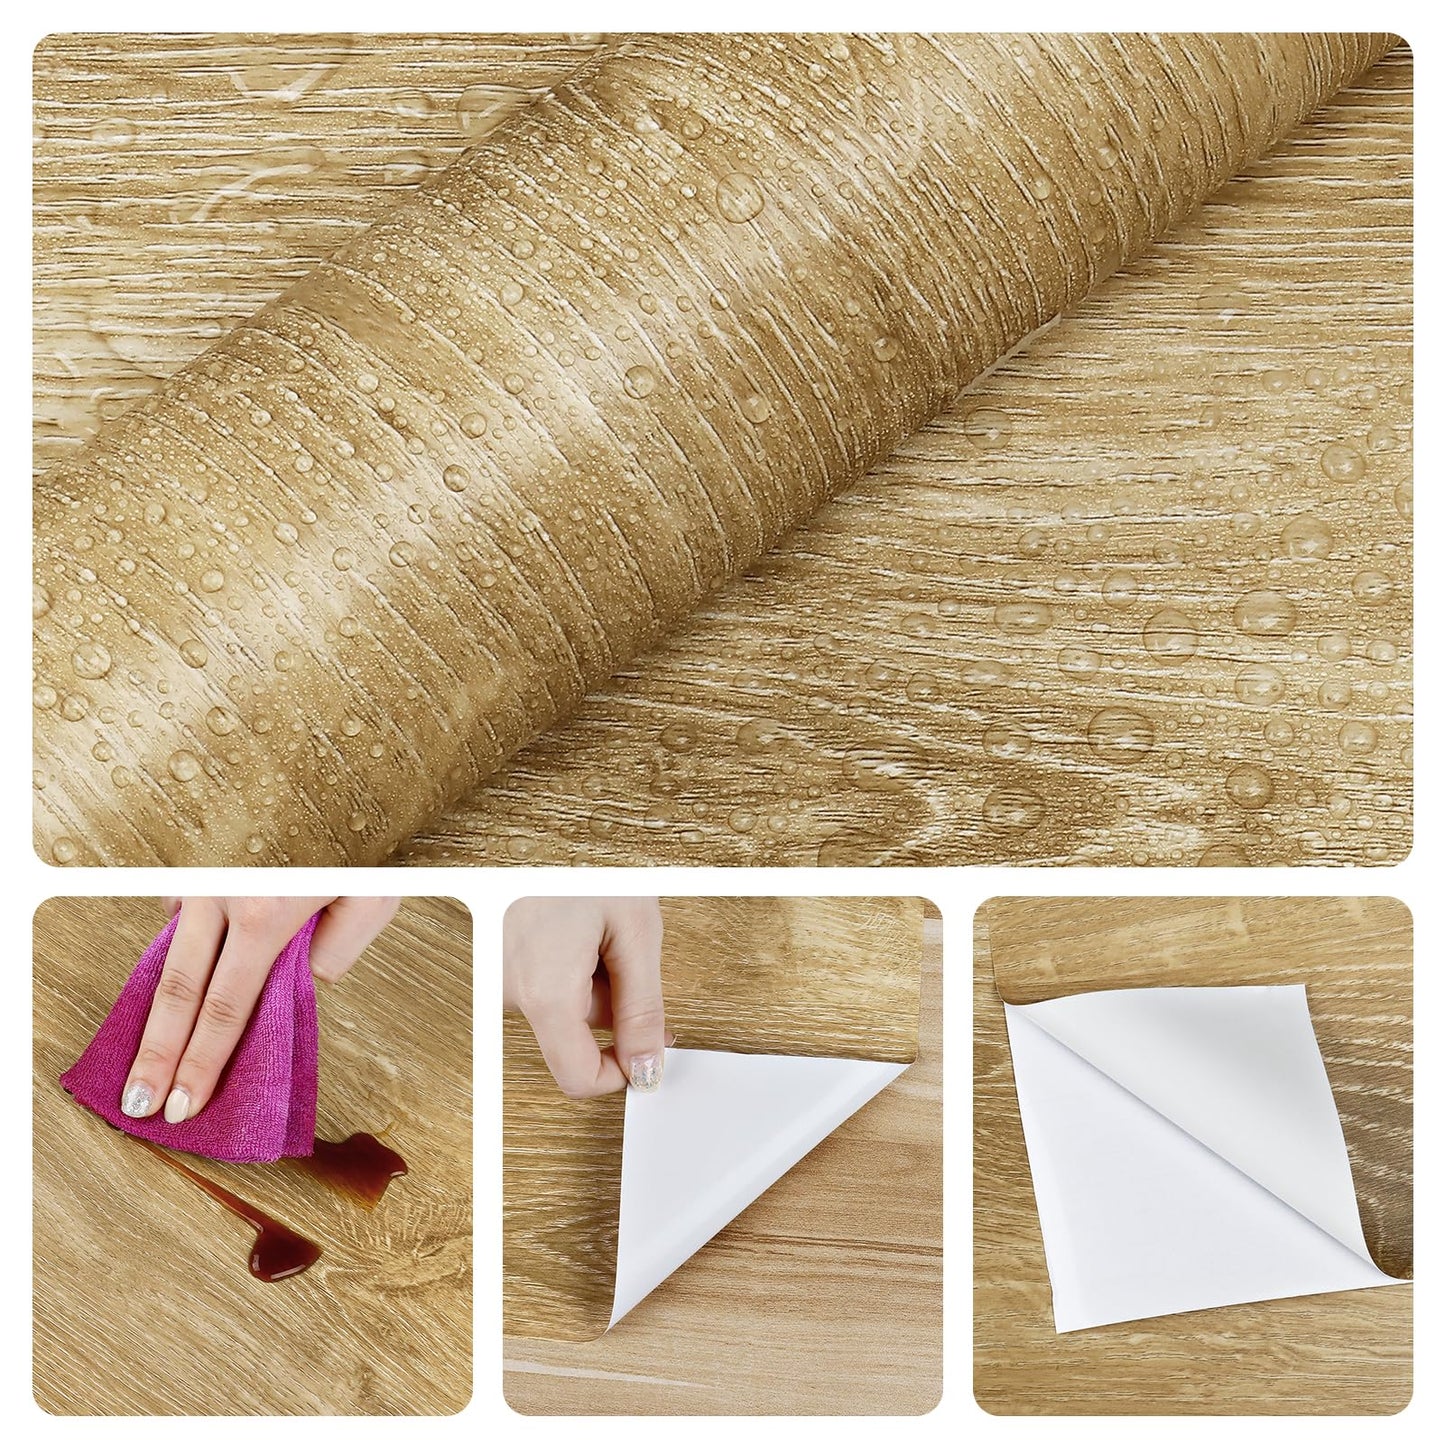 Vintage Wood Contact Paper Peel and Stick Countertops for Kitchen Bedroom Locker Wood Wallpaper Accent Wall Self Adhesive Wood Grain Contact Paper Vinyl Removable Counter Top Stick Paper Wood Look